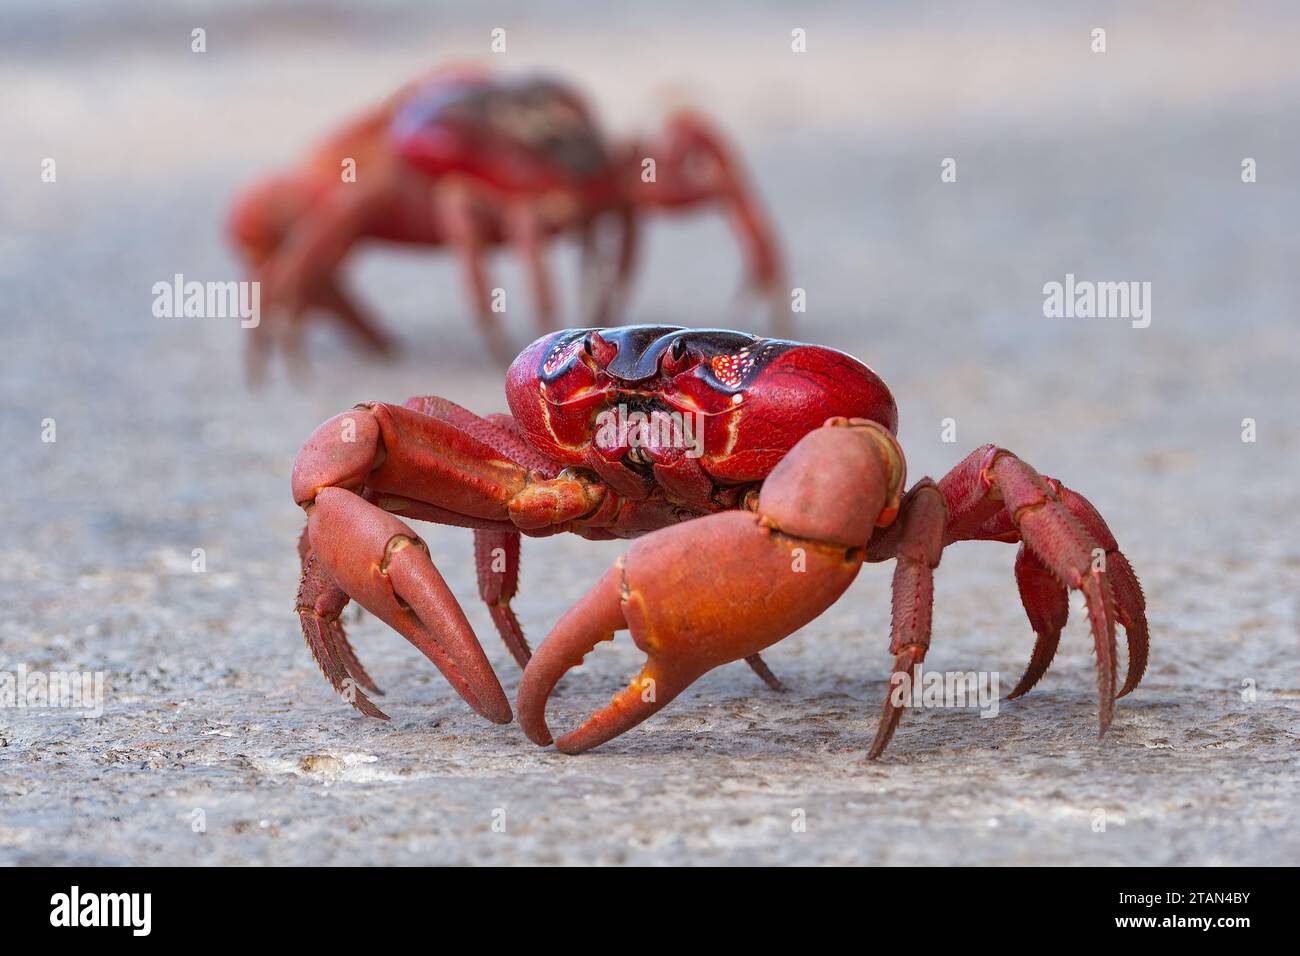 Red Crab (Gecarcoidea natalis) crossing the road during its annual migration, Christmas Island, Australia Stock Photo